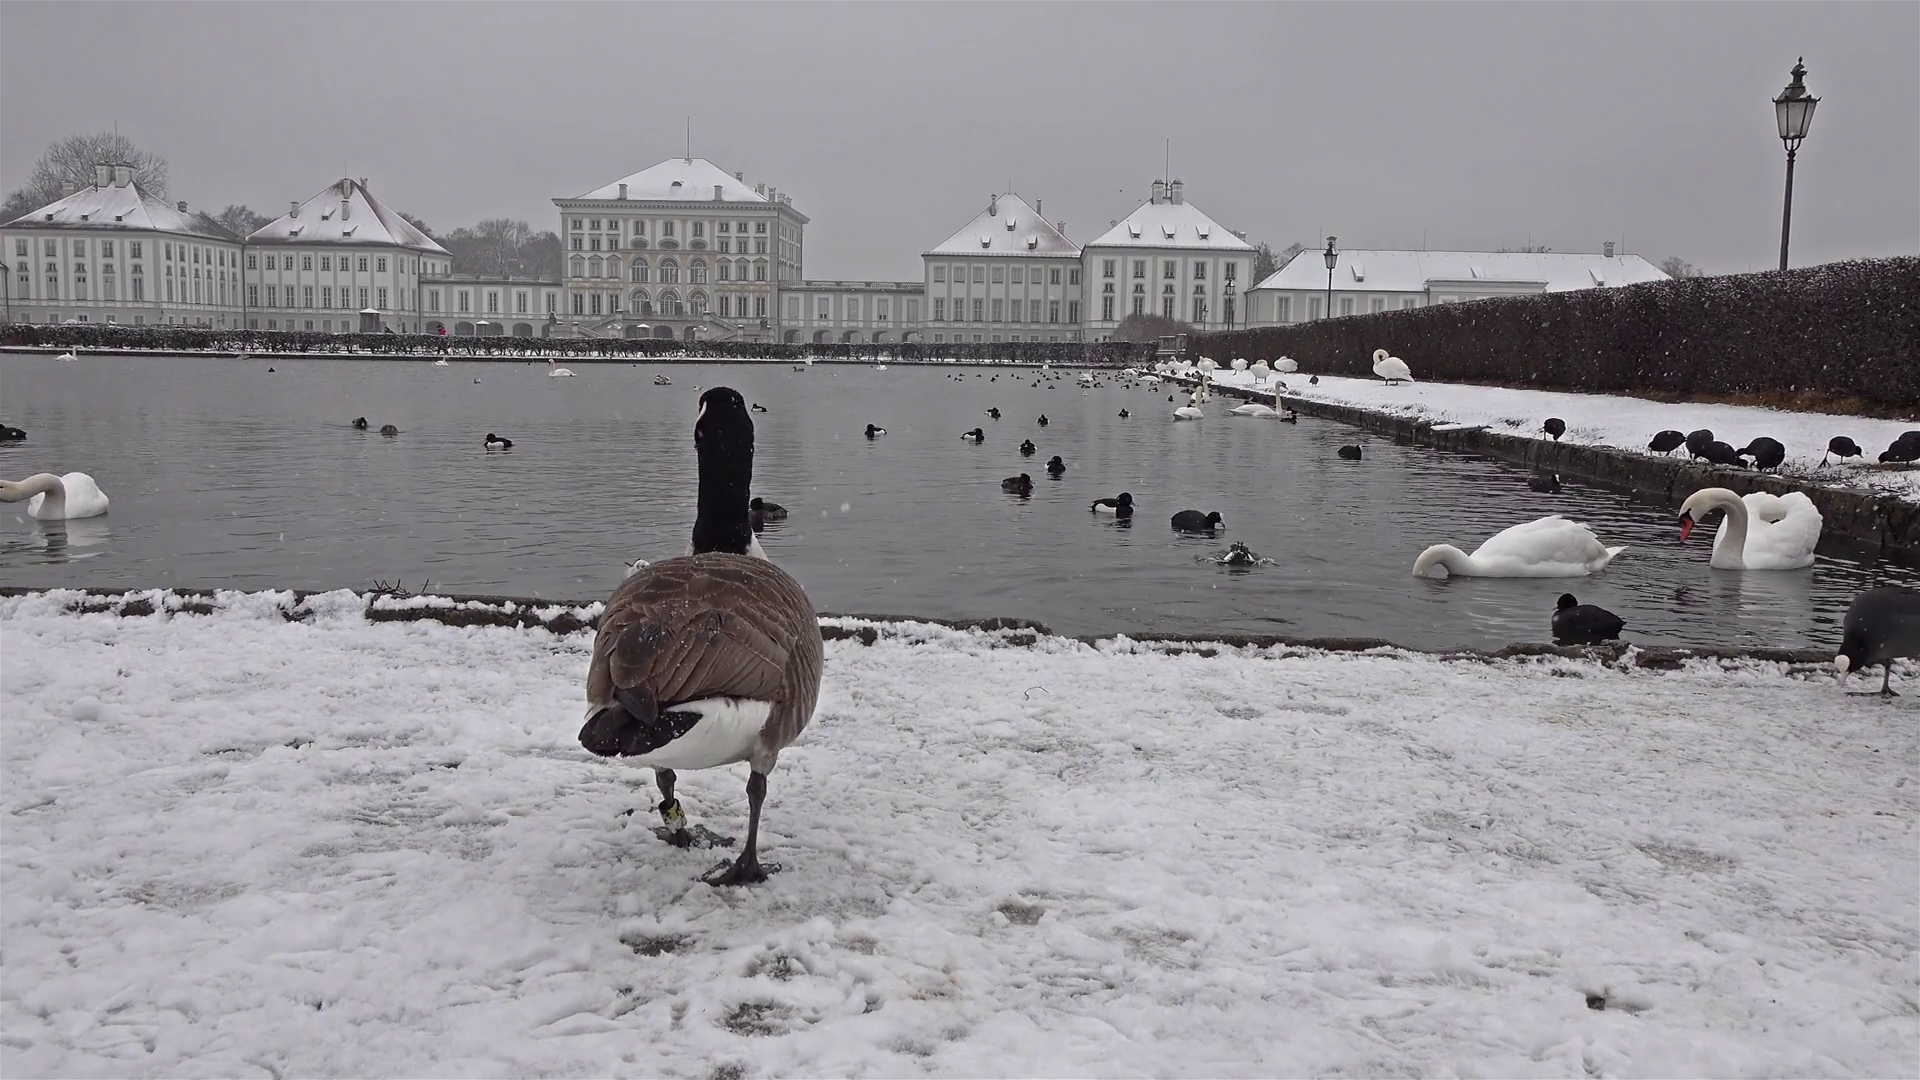 Wild goose in front of Castle Nymphenburg Palace in winter with snow ...